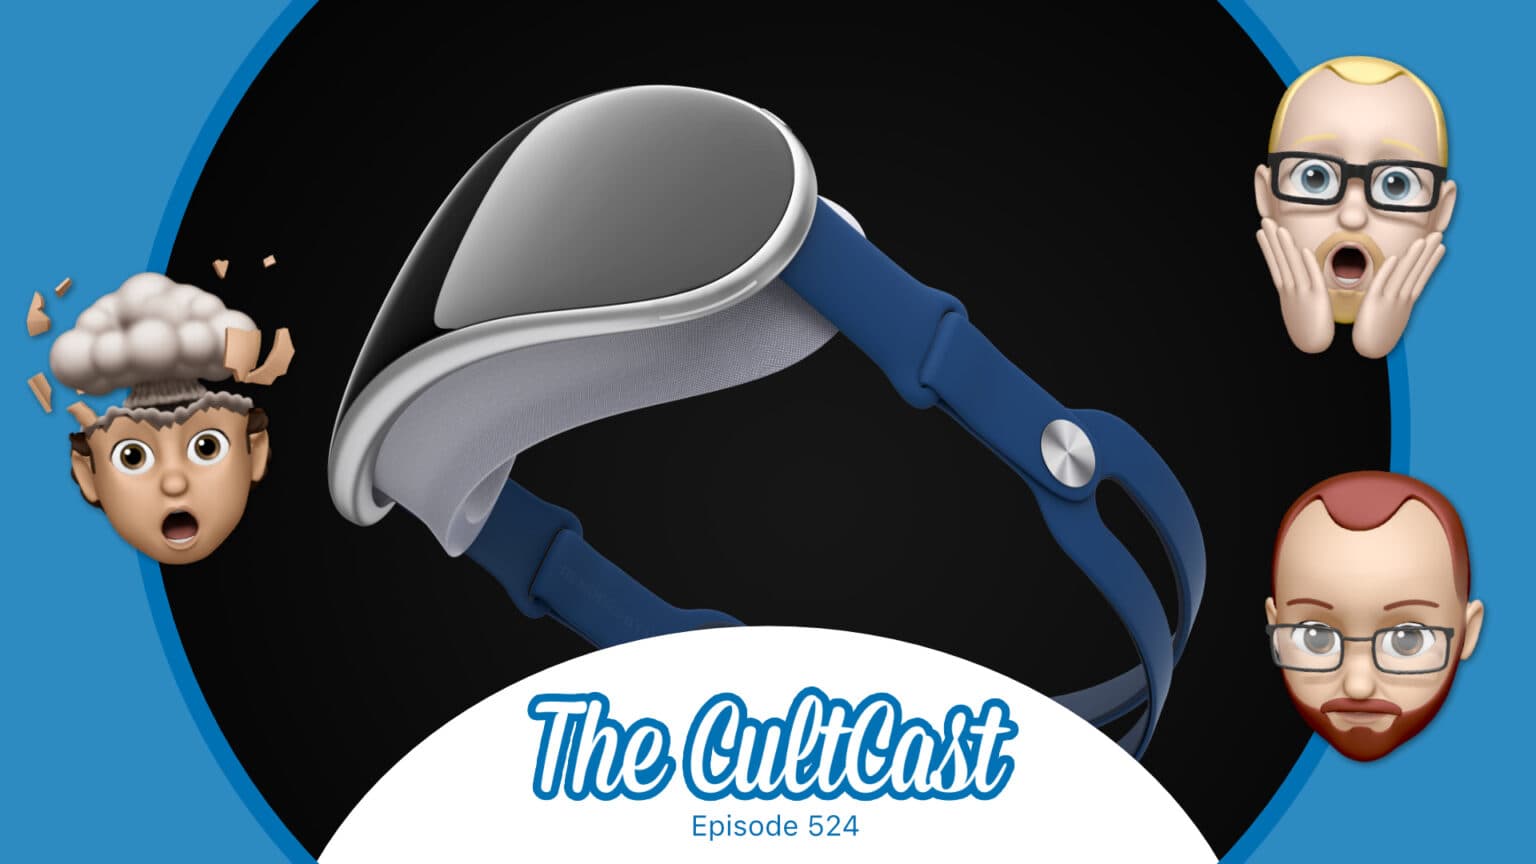 CultCast podcast: About those Apple VR headset renders ...